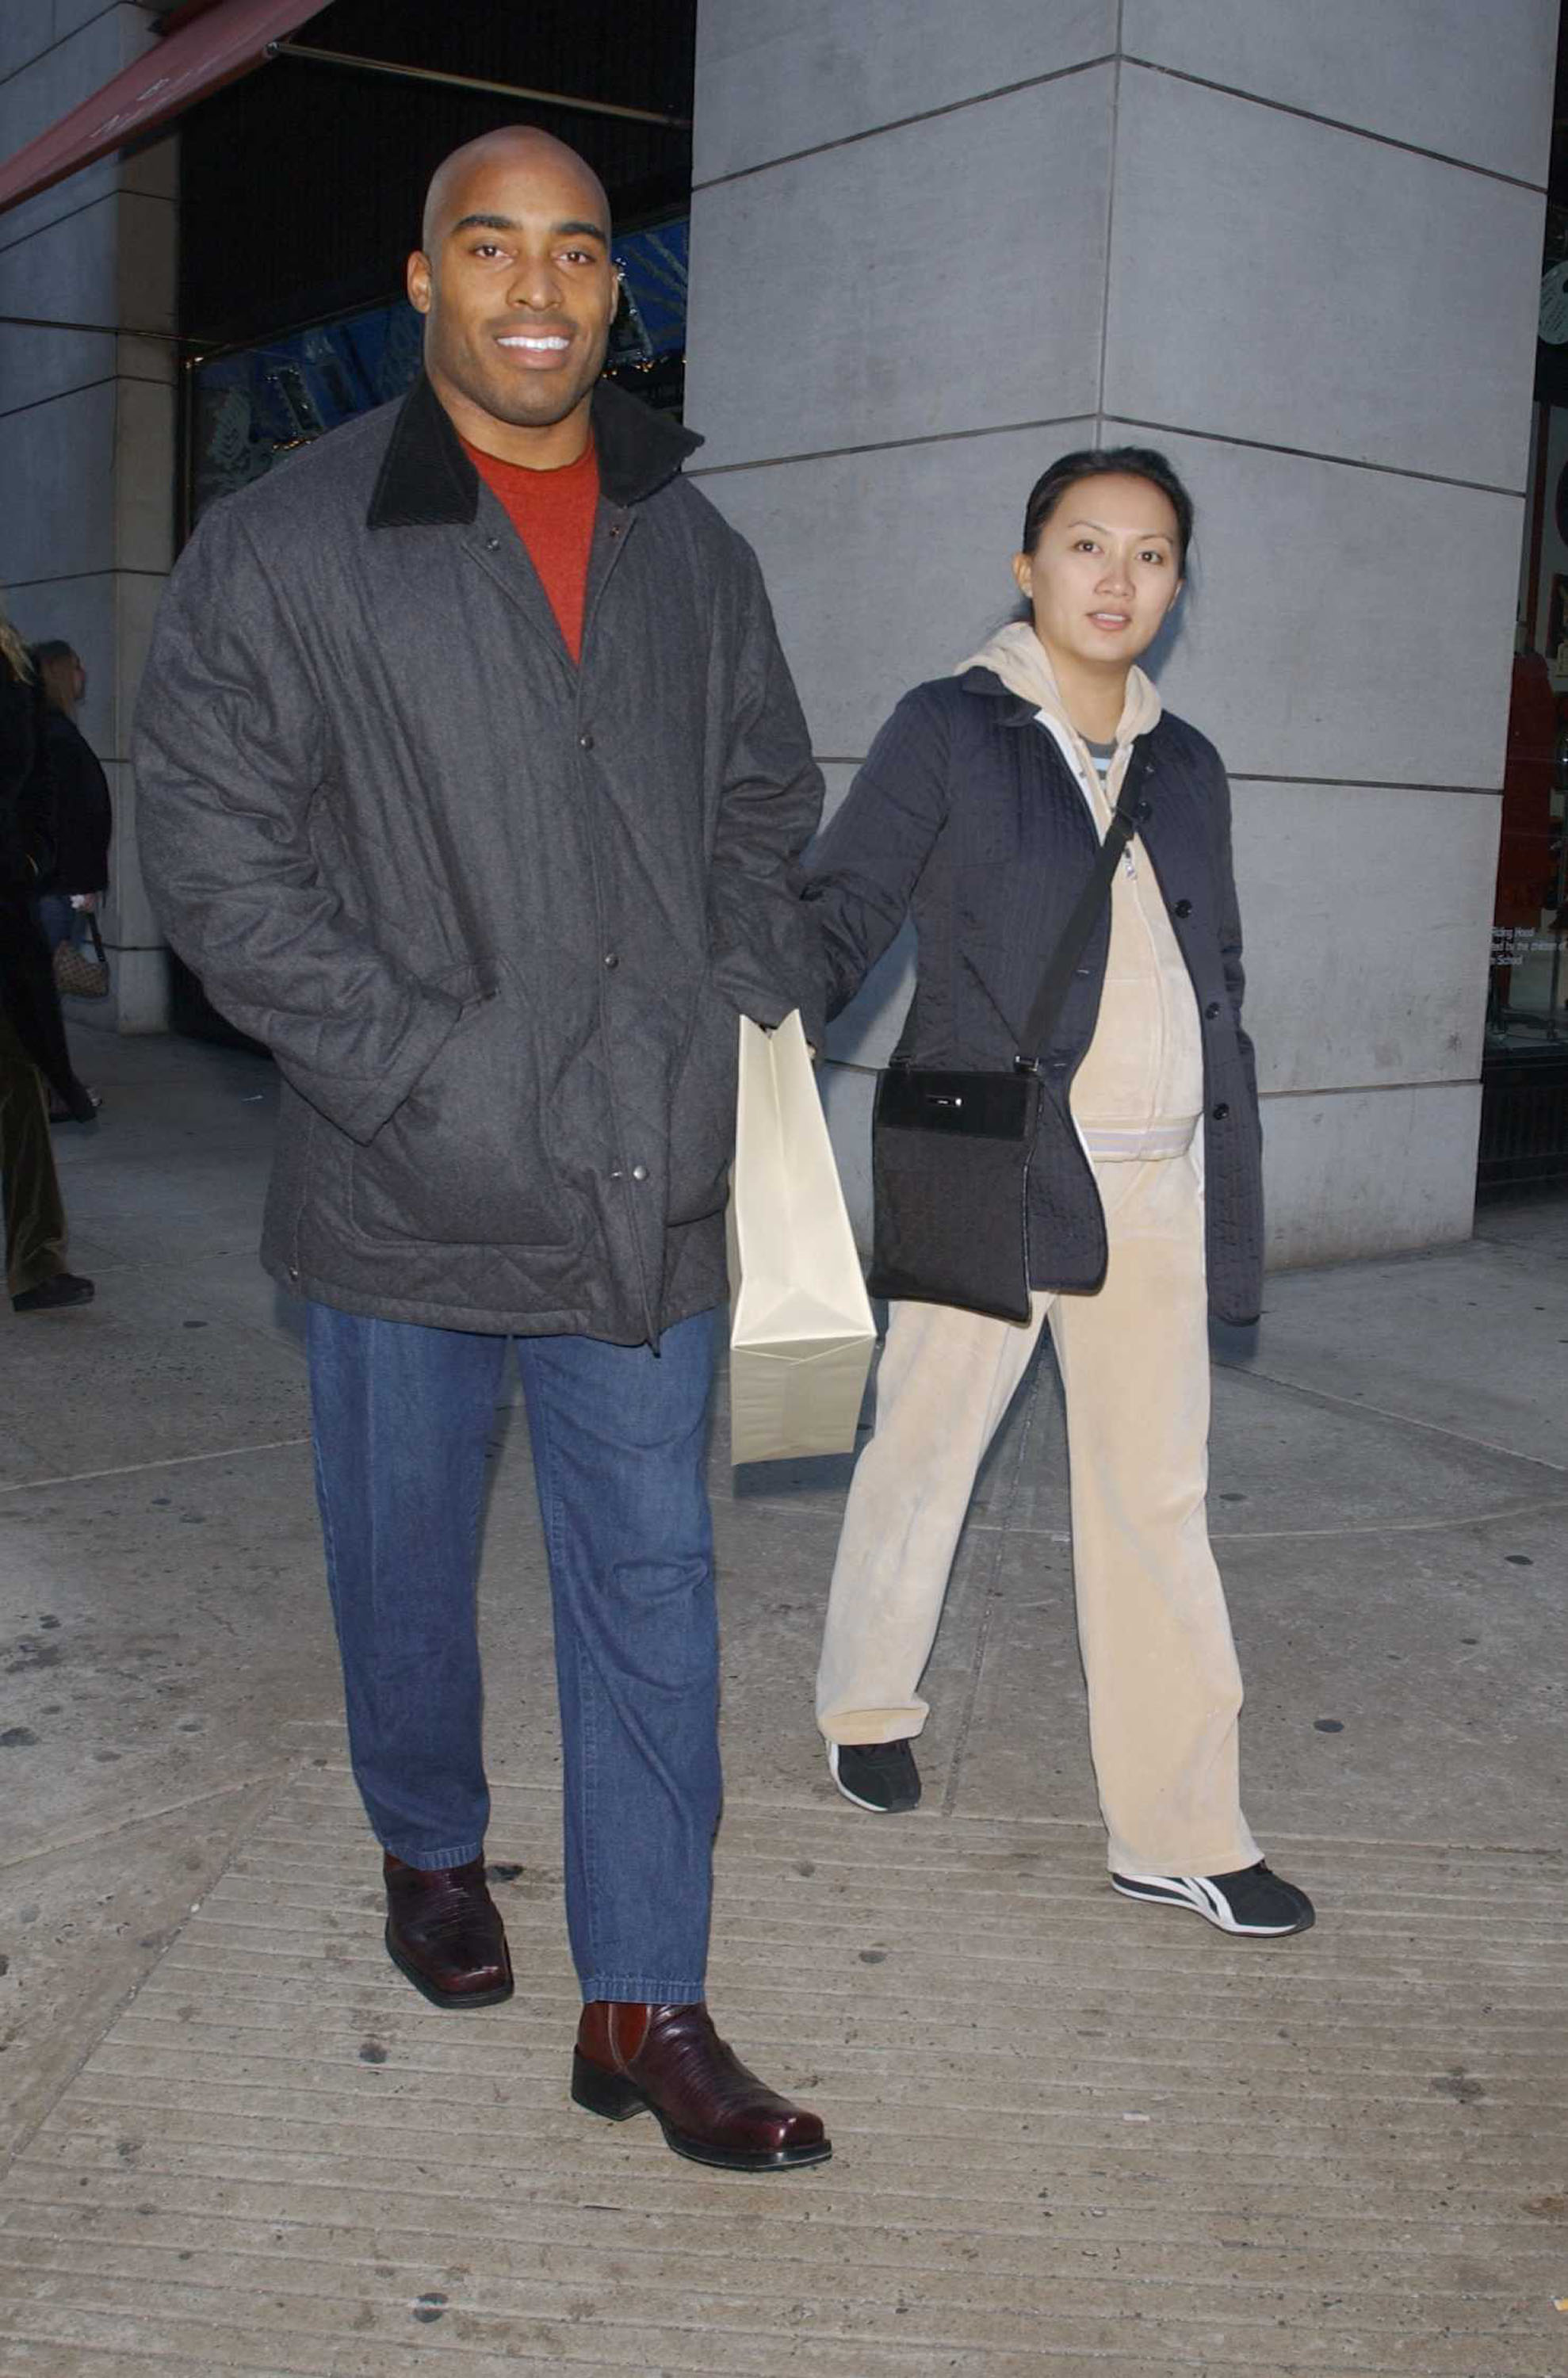 Tiki Barber and Ginny Cha are seen on December 29, 2003, in New York. | Source: Getty Images